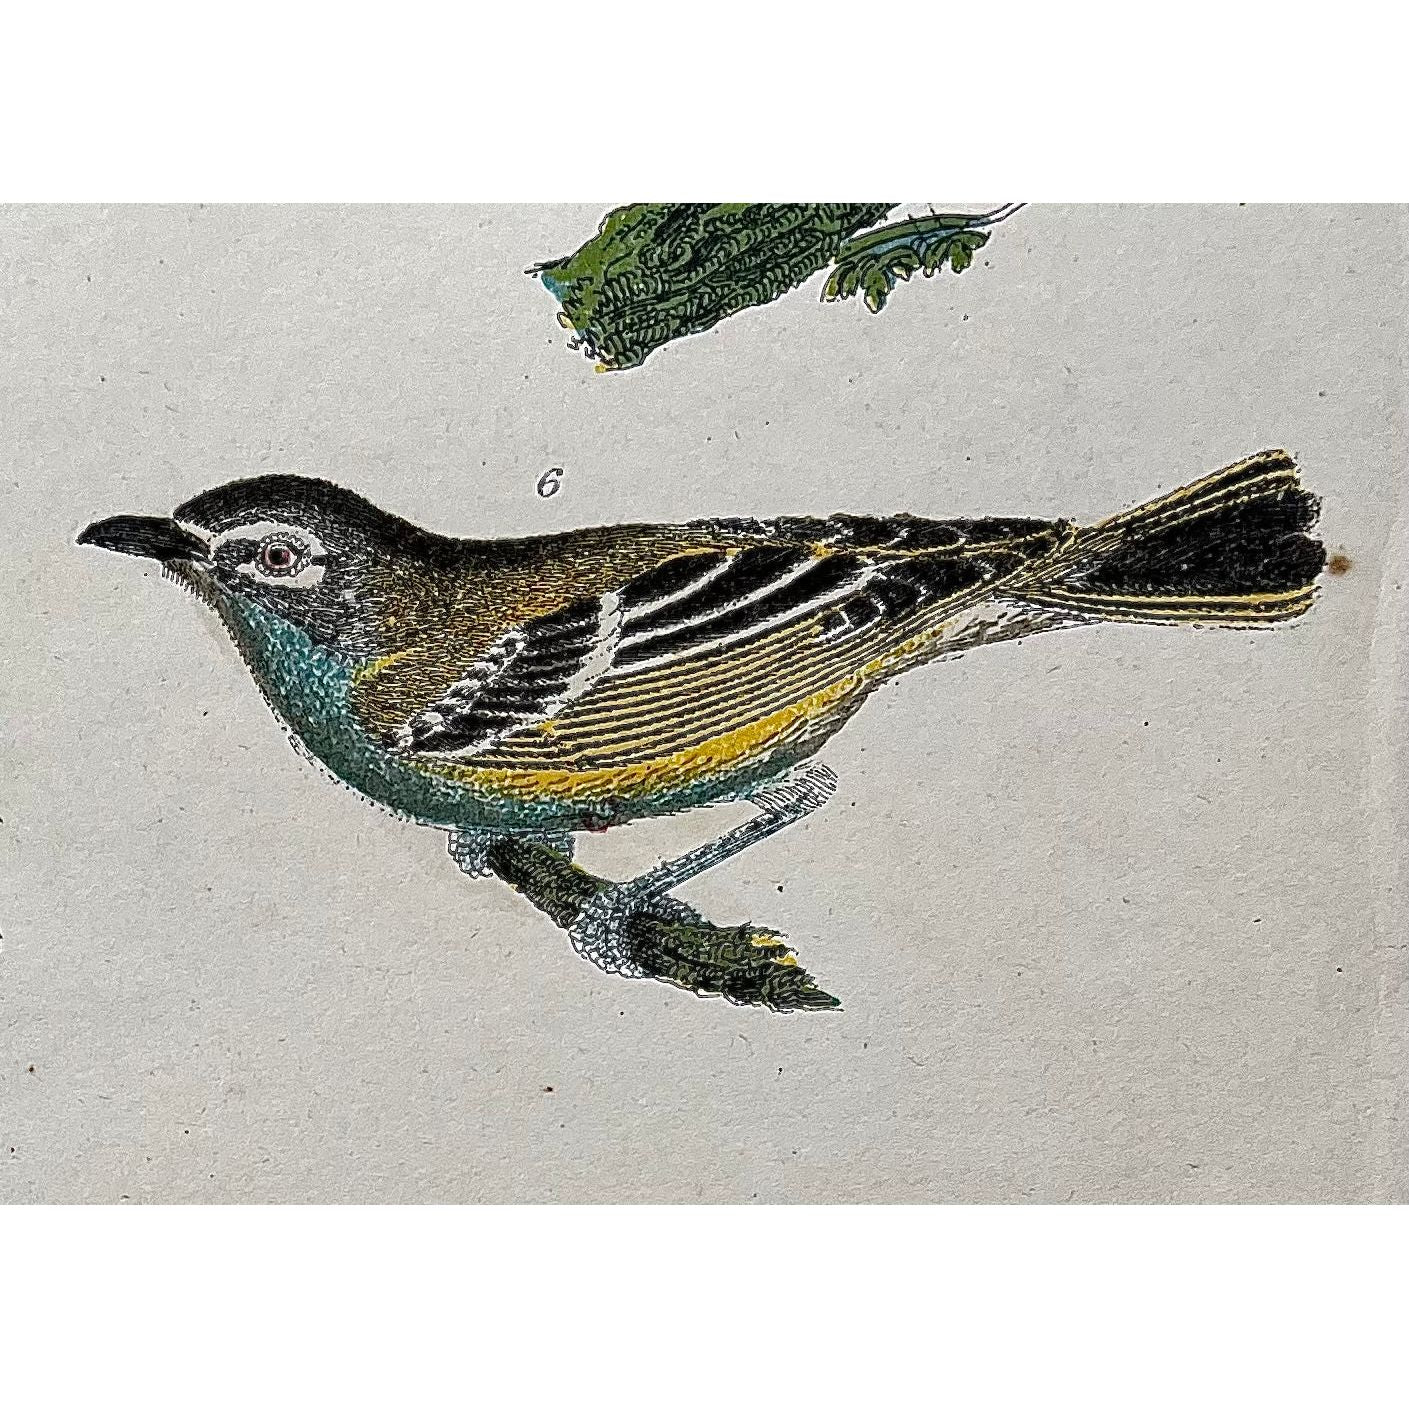 Original color antique bird print by Alexander Wilson from American Ornithology from 1836, 1. American Siskin. 2. Rose breasted Grosbeak. 3. Green black throated Warbler. 4. Yellow rump W. 5. Cerulean W. 6. Solitary Flycatcher. for sale by Victoria Cooper Antique Prints